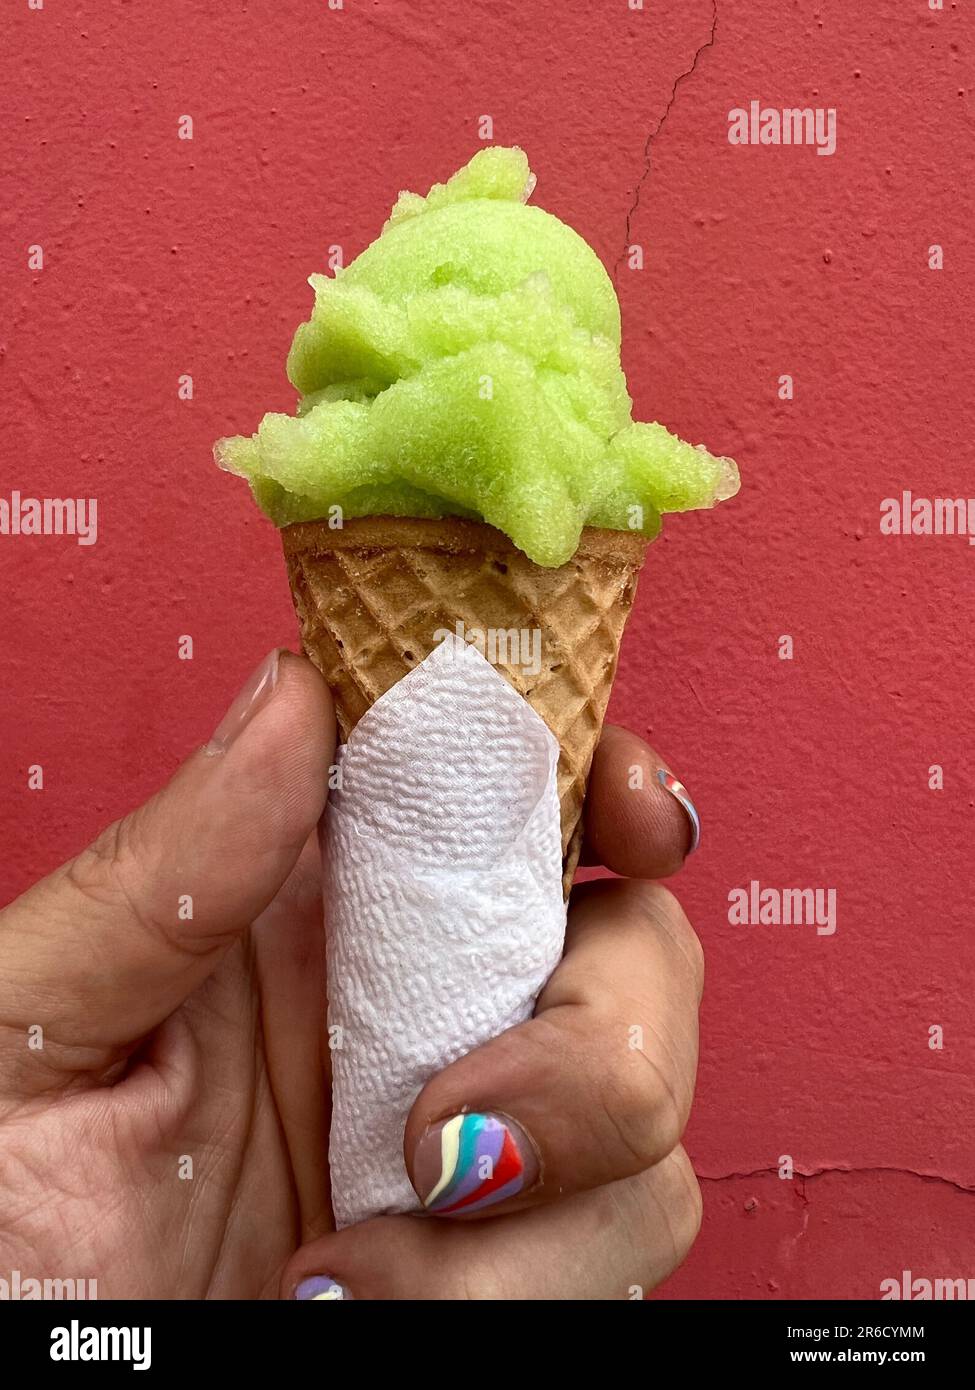 Hand with nail art manicure swirl design holding a ice cream cone with a scoop of lime green sorbet Stock Photo